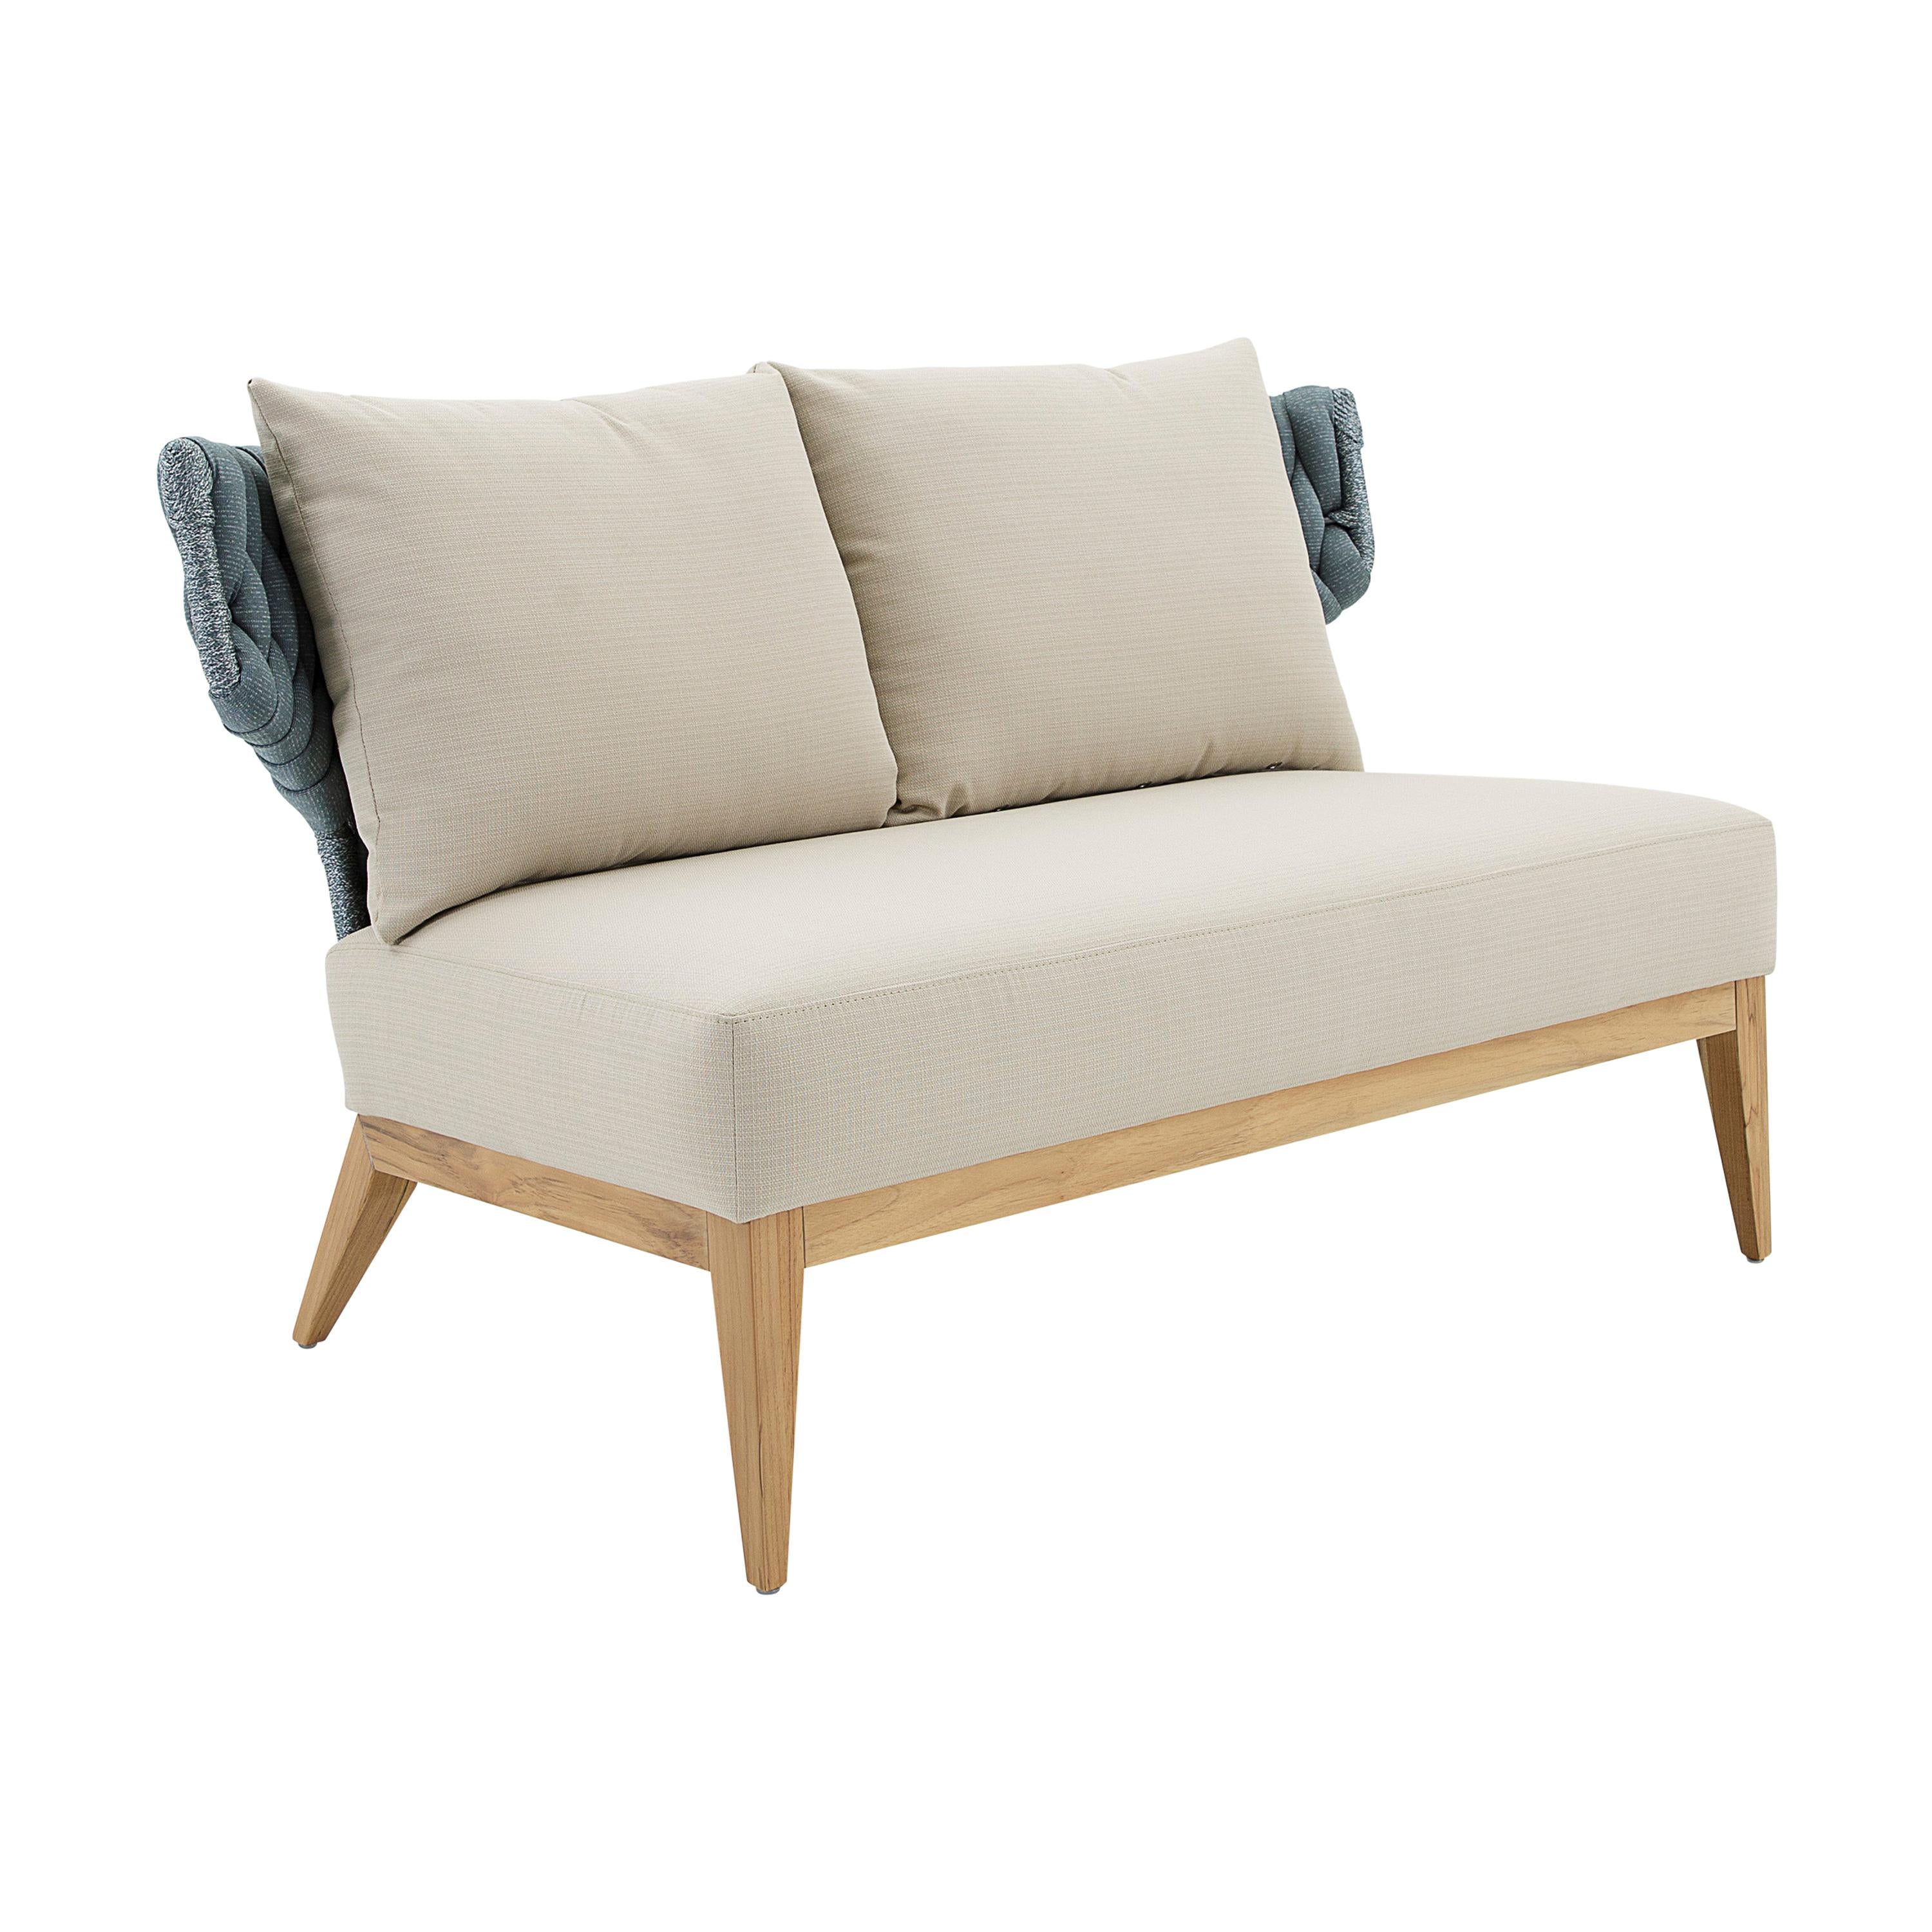 The Beluga set is the perfect combination of a beige fabric covering the seat and pillows and a blue fabric for the back, with wood legs in a teak finish to match with this contemporary design. Uultis have designed this incredible set to give you